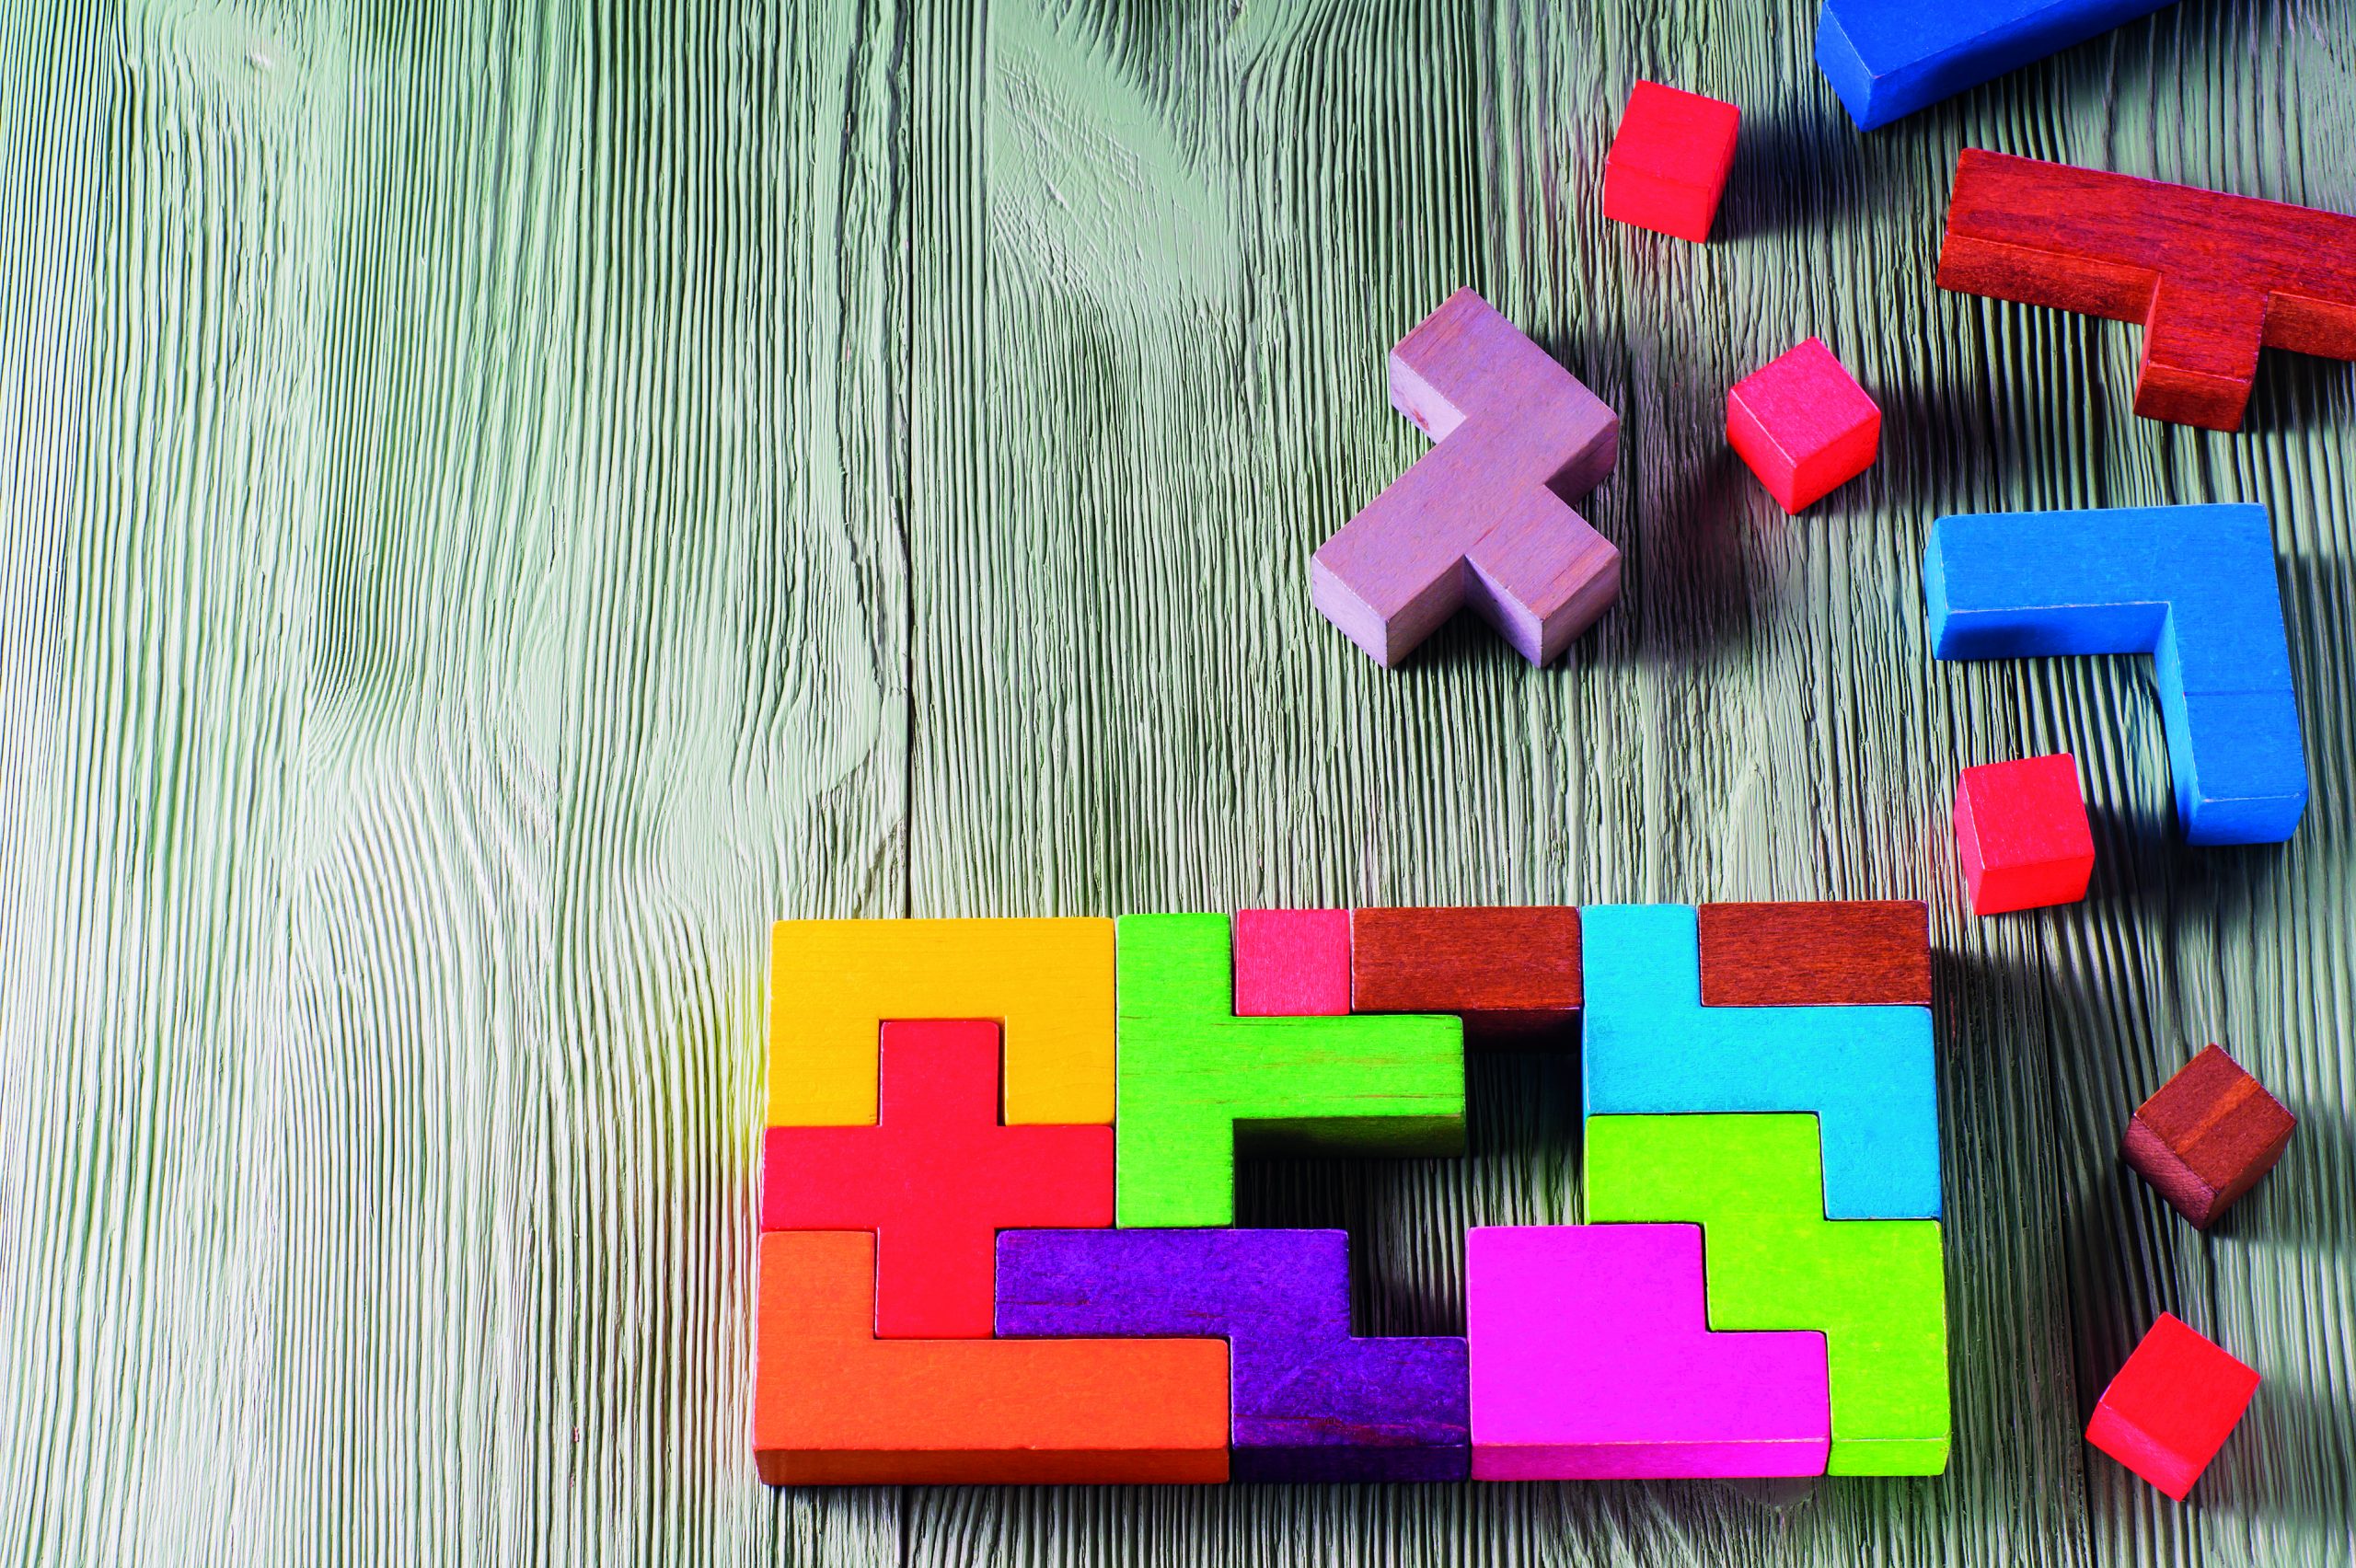 The concept of logical thinking. Geometric shapes on a wooden background. Tetris toy wooden blocks.